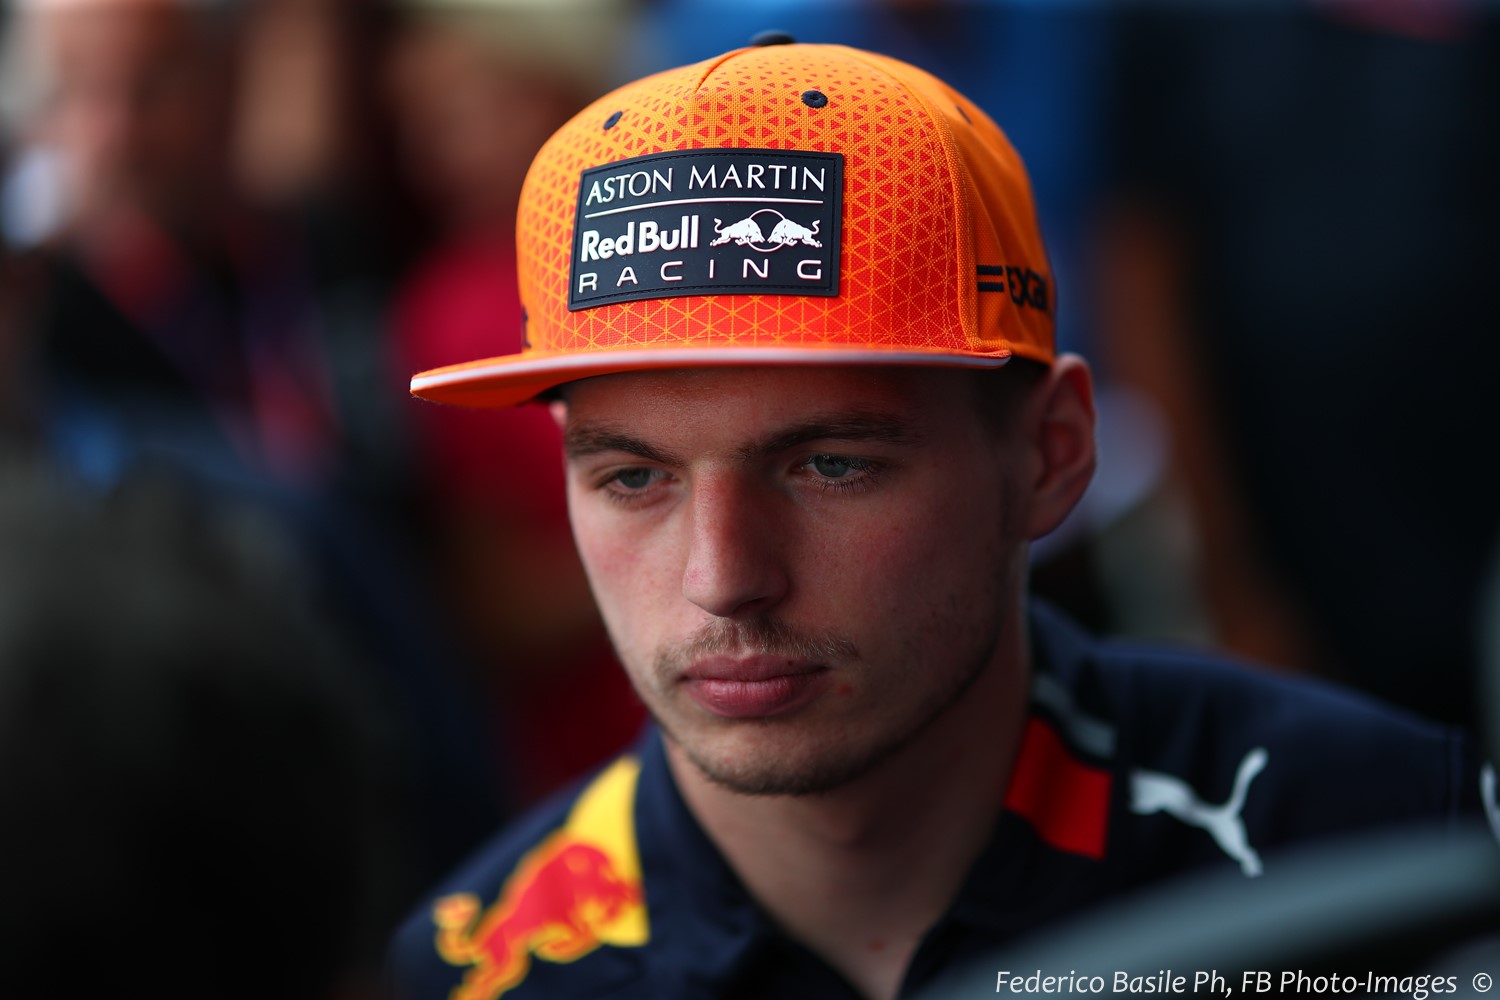 Max Verstappen at Monza says Rosberg needs to shut his mouth